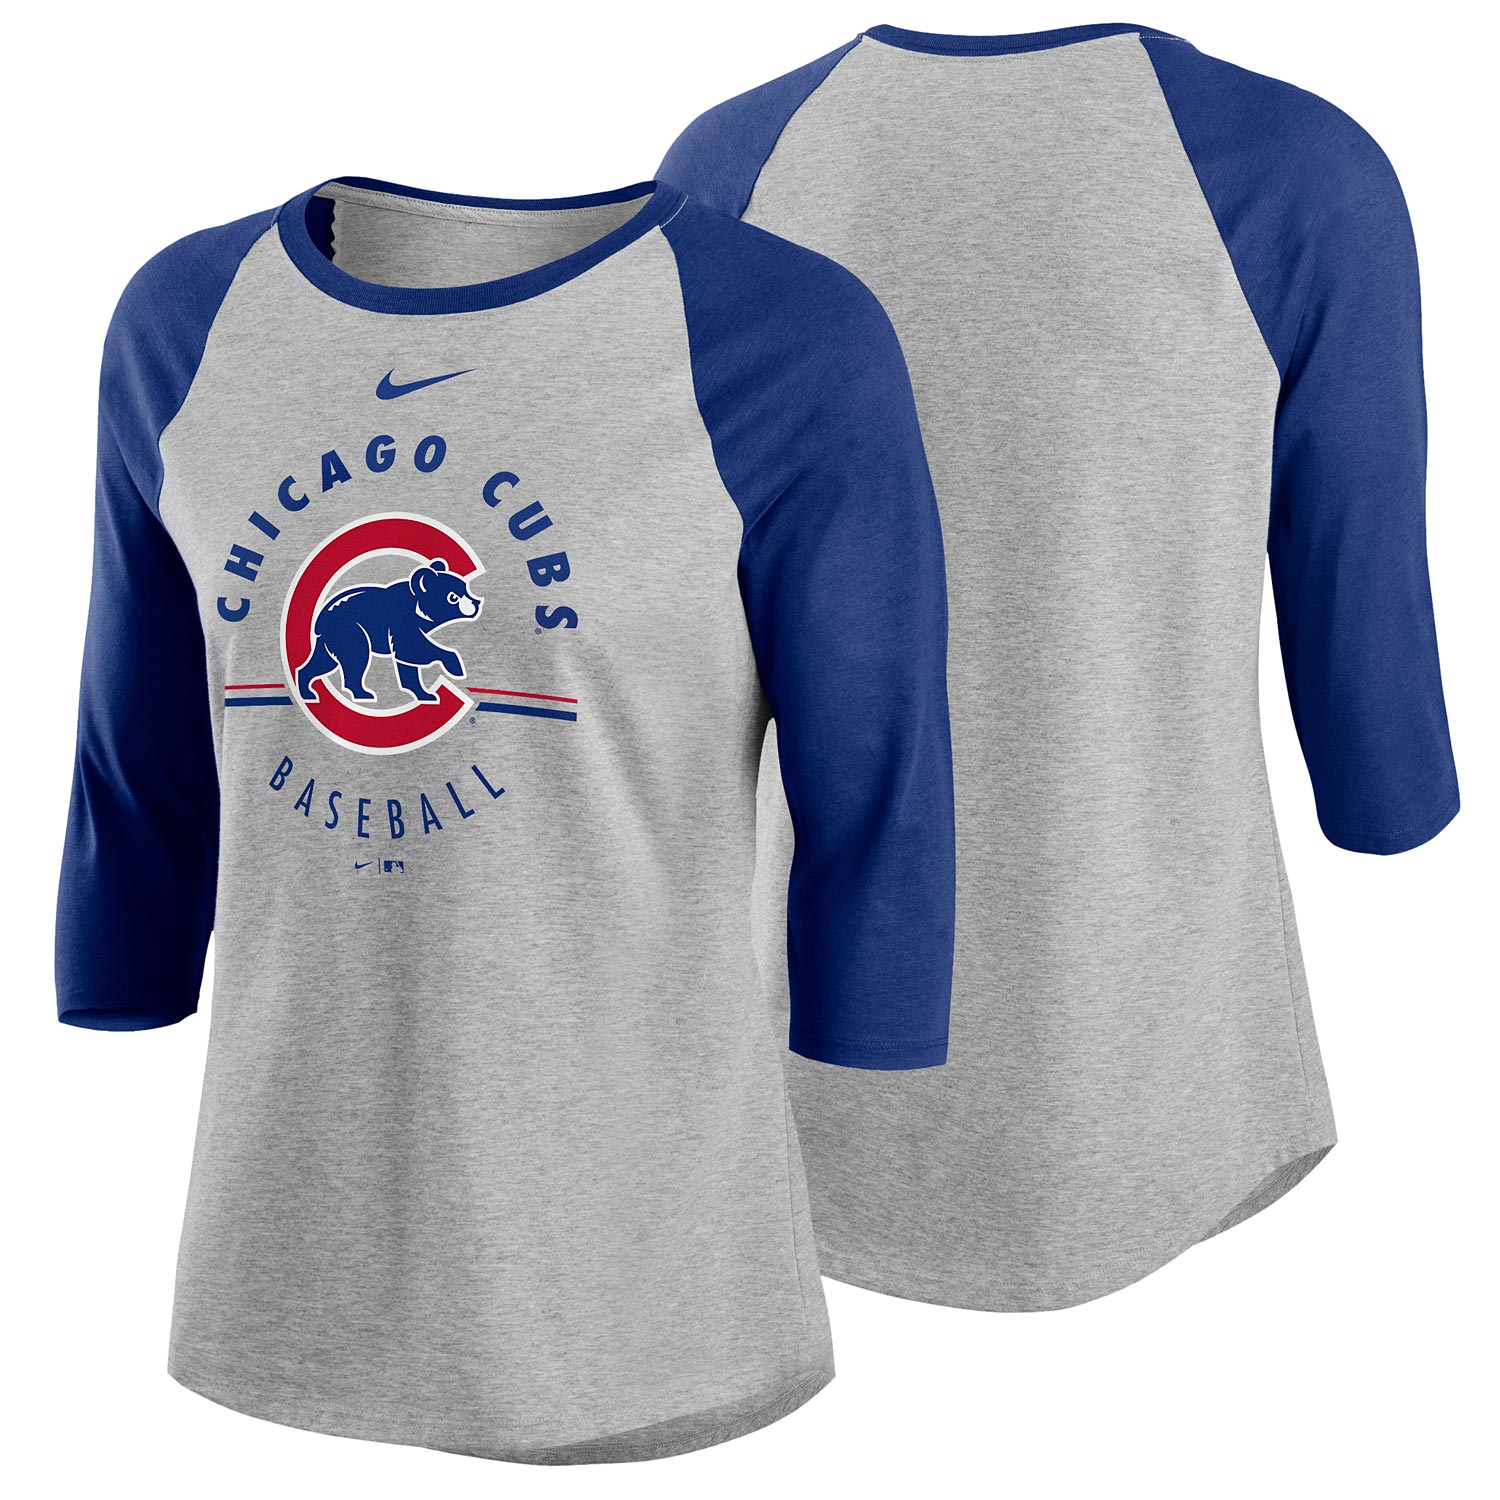 Men's Nike Royal Chicago Cubs Authentic Collection Tri-Blend